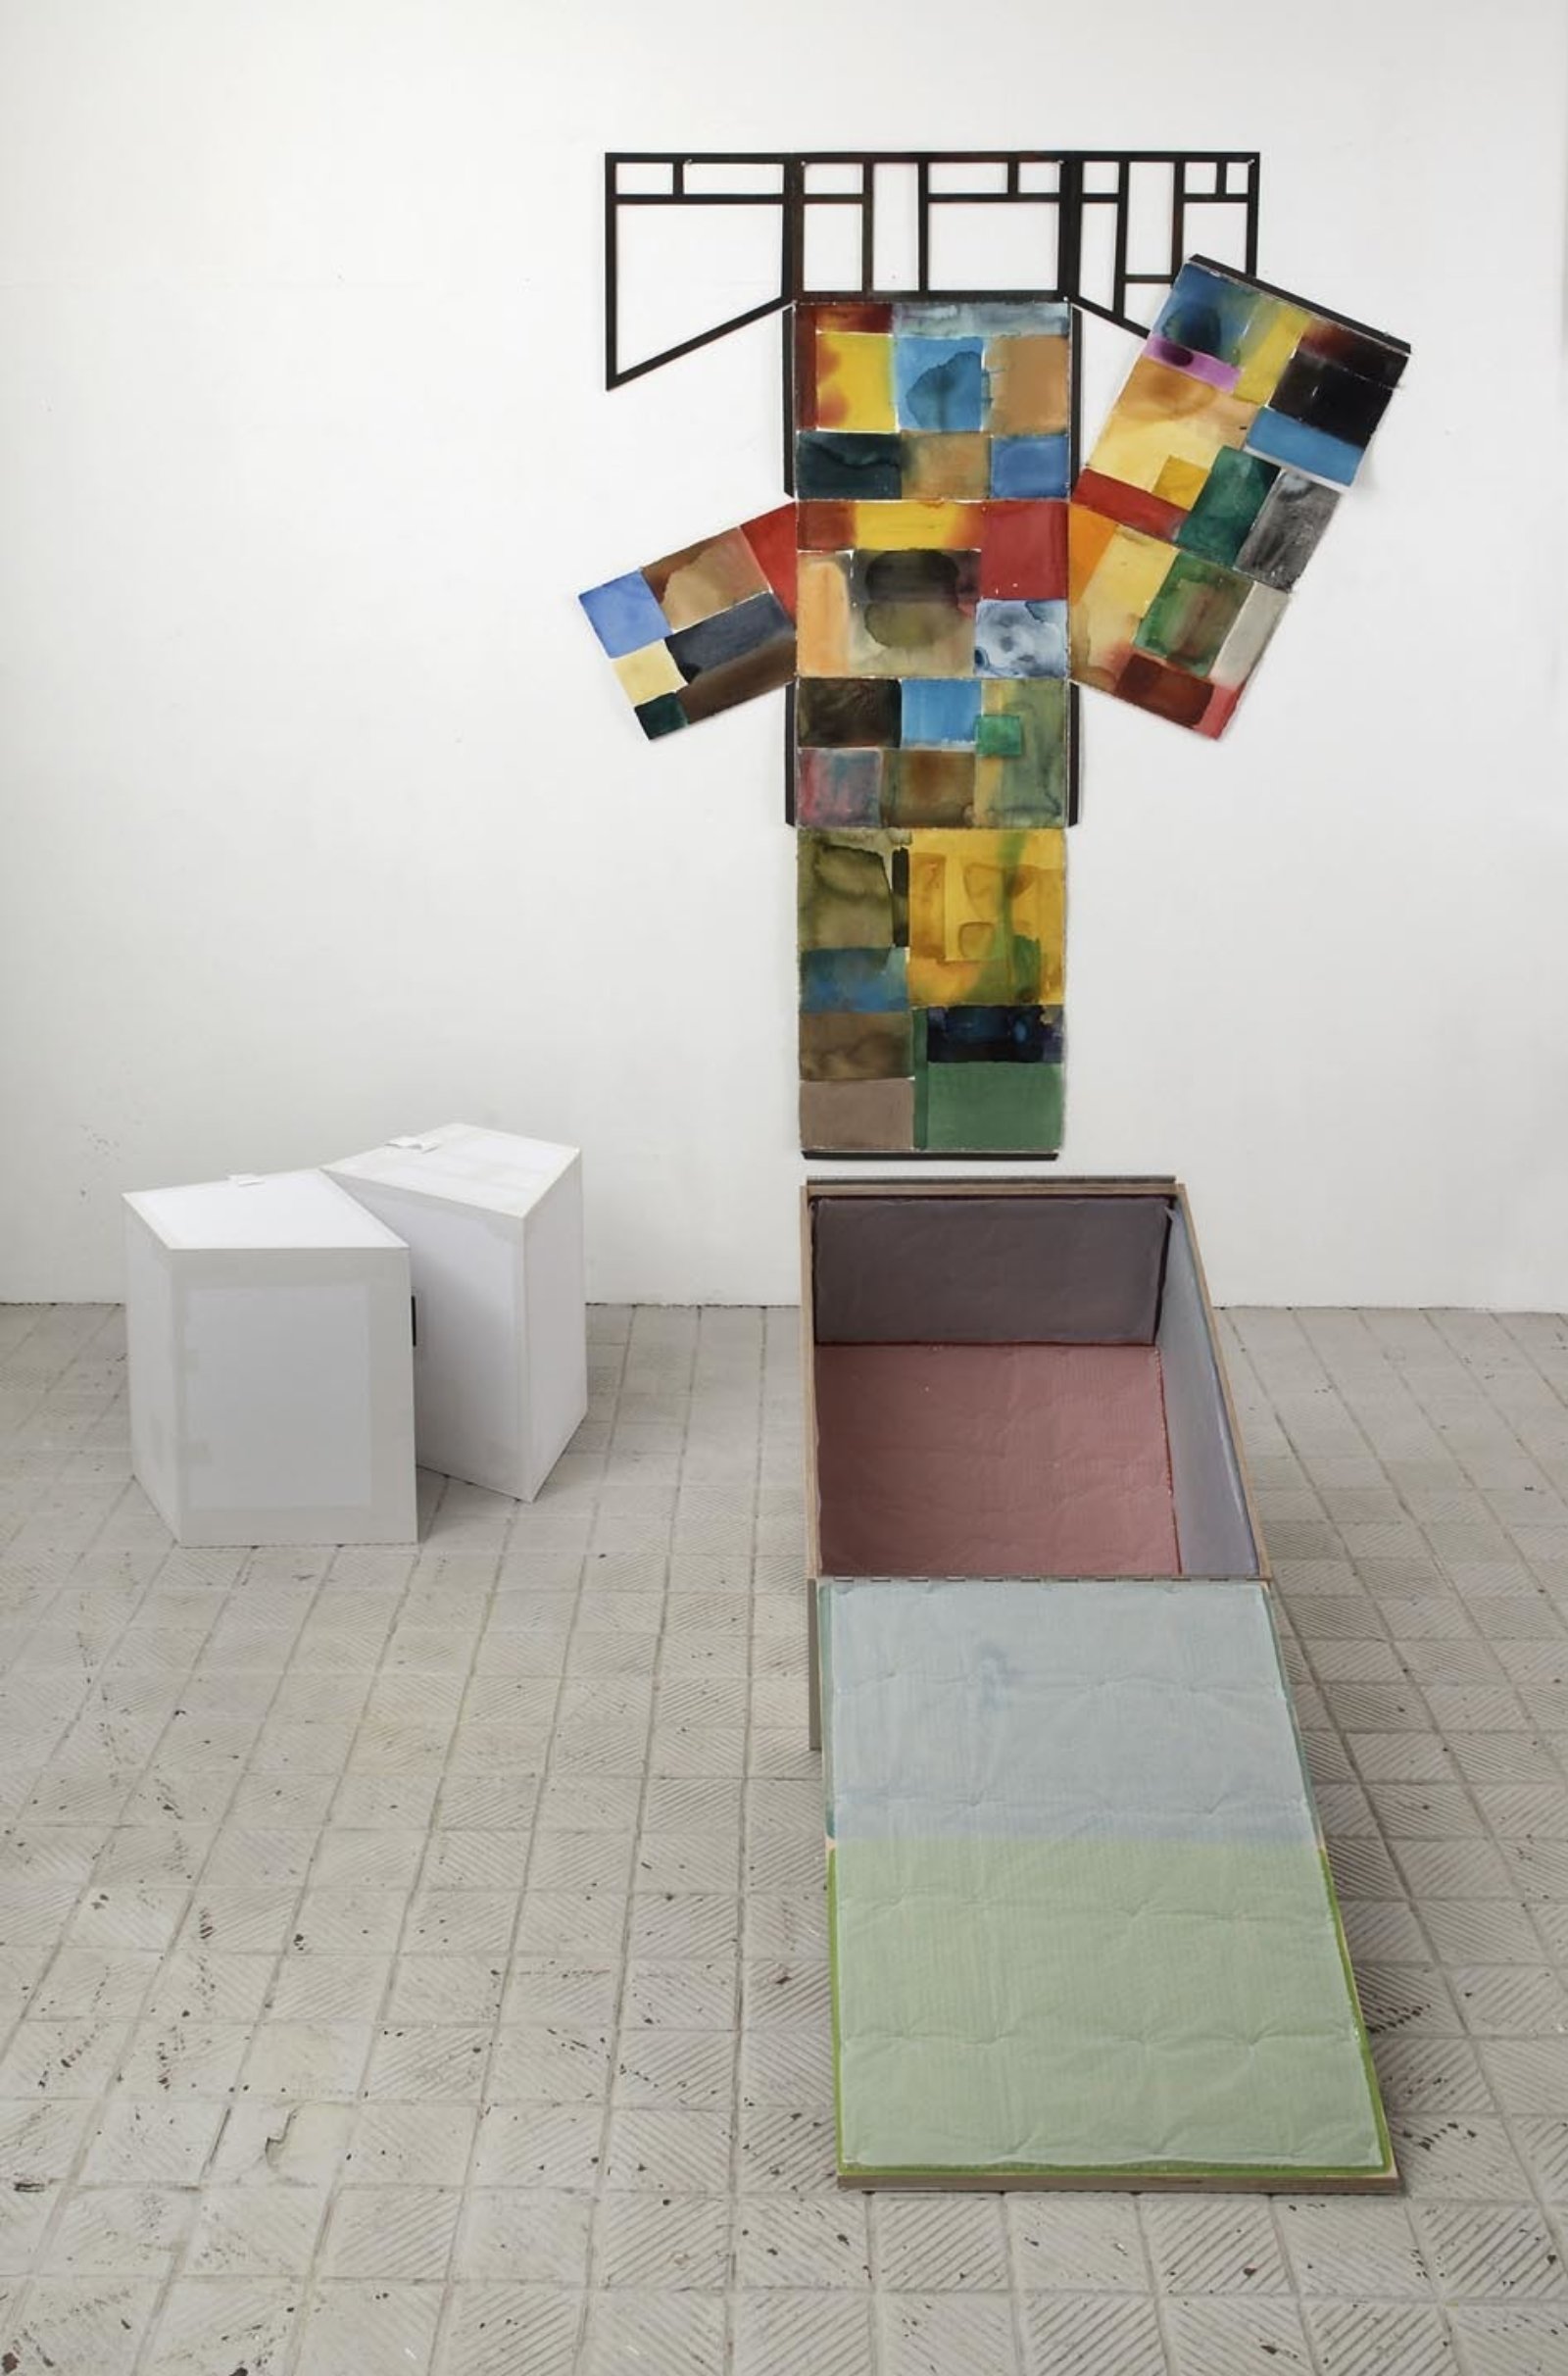 Christina Mackie, Sculpture of an idea of a painting of you, 2009, birch-ply, paper, plastic, oil paint, fabric, board, watercolour, linen, magnet, dimensions variable